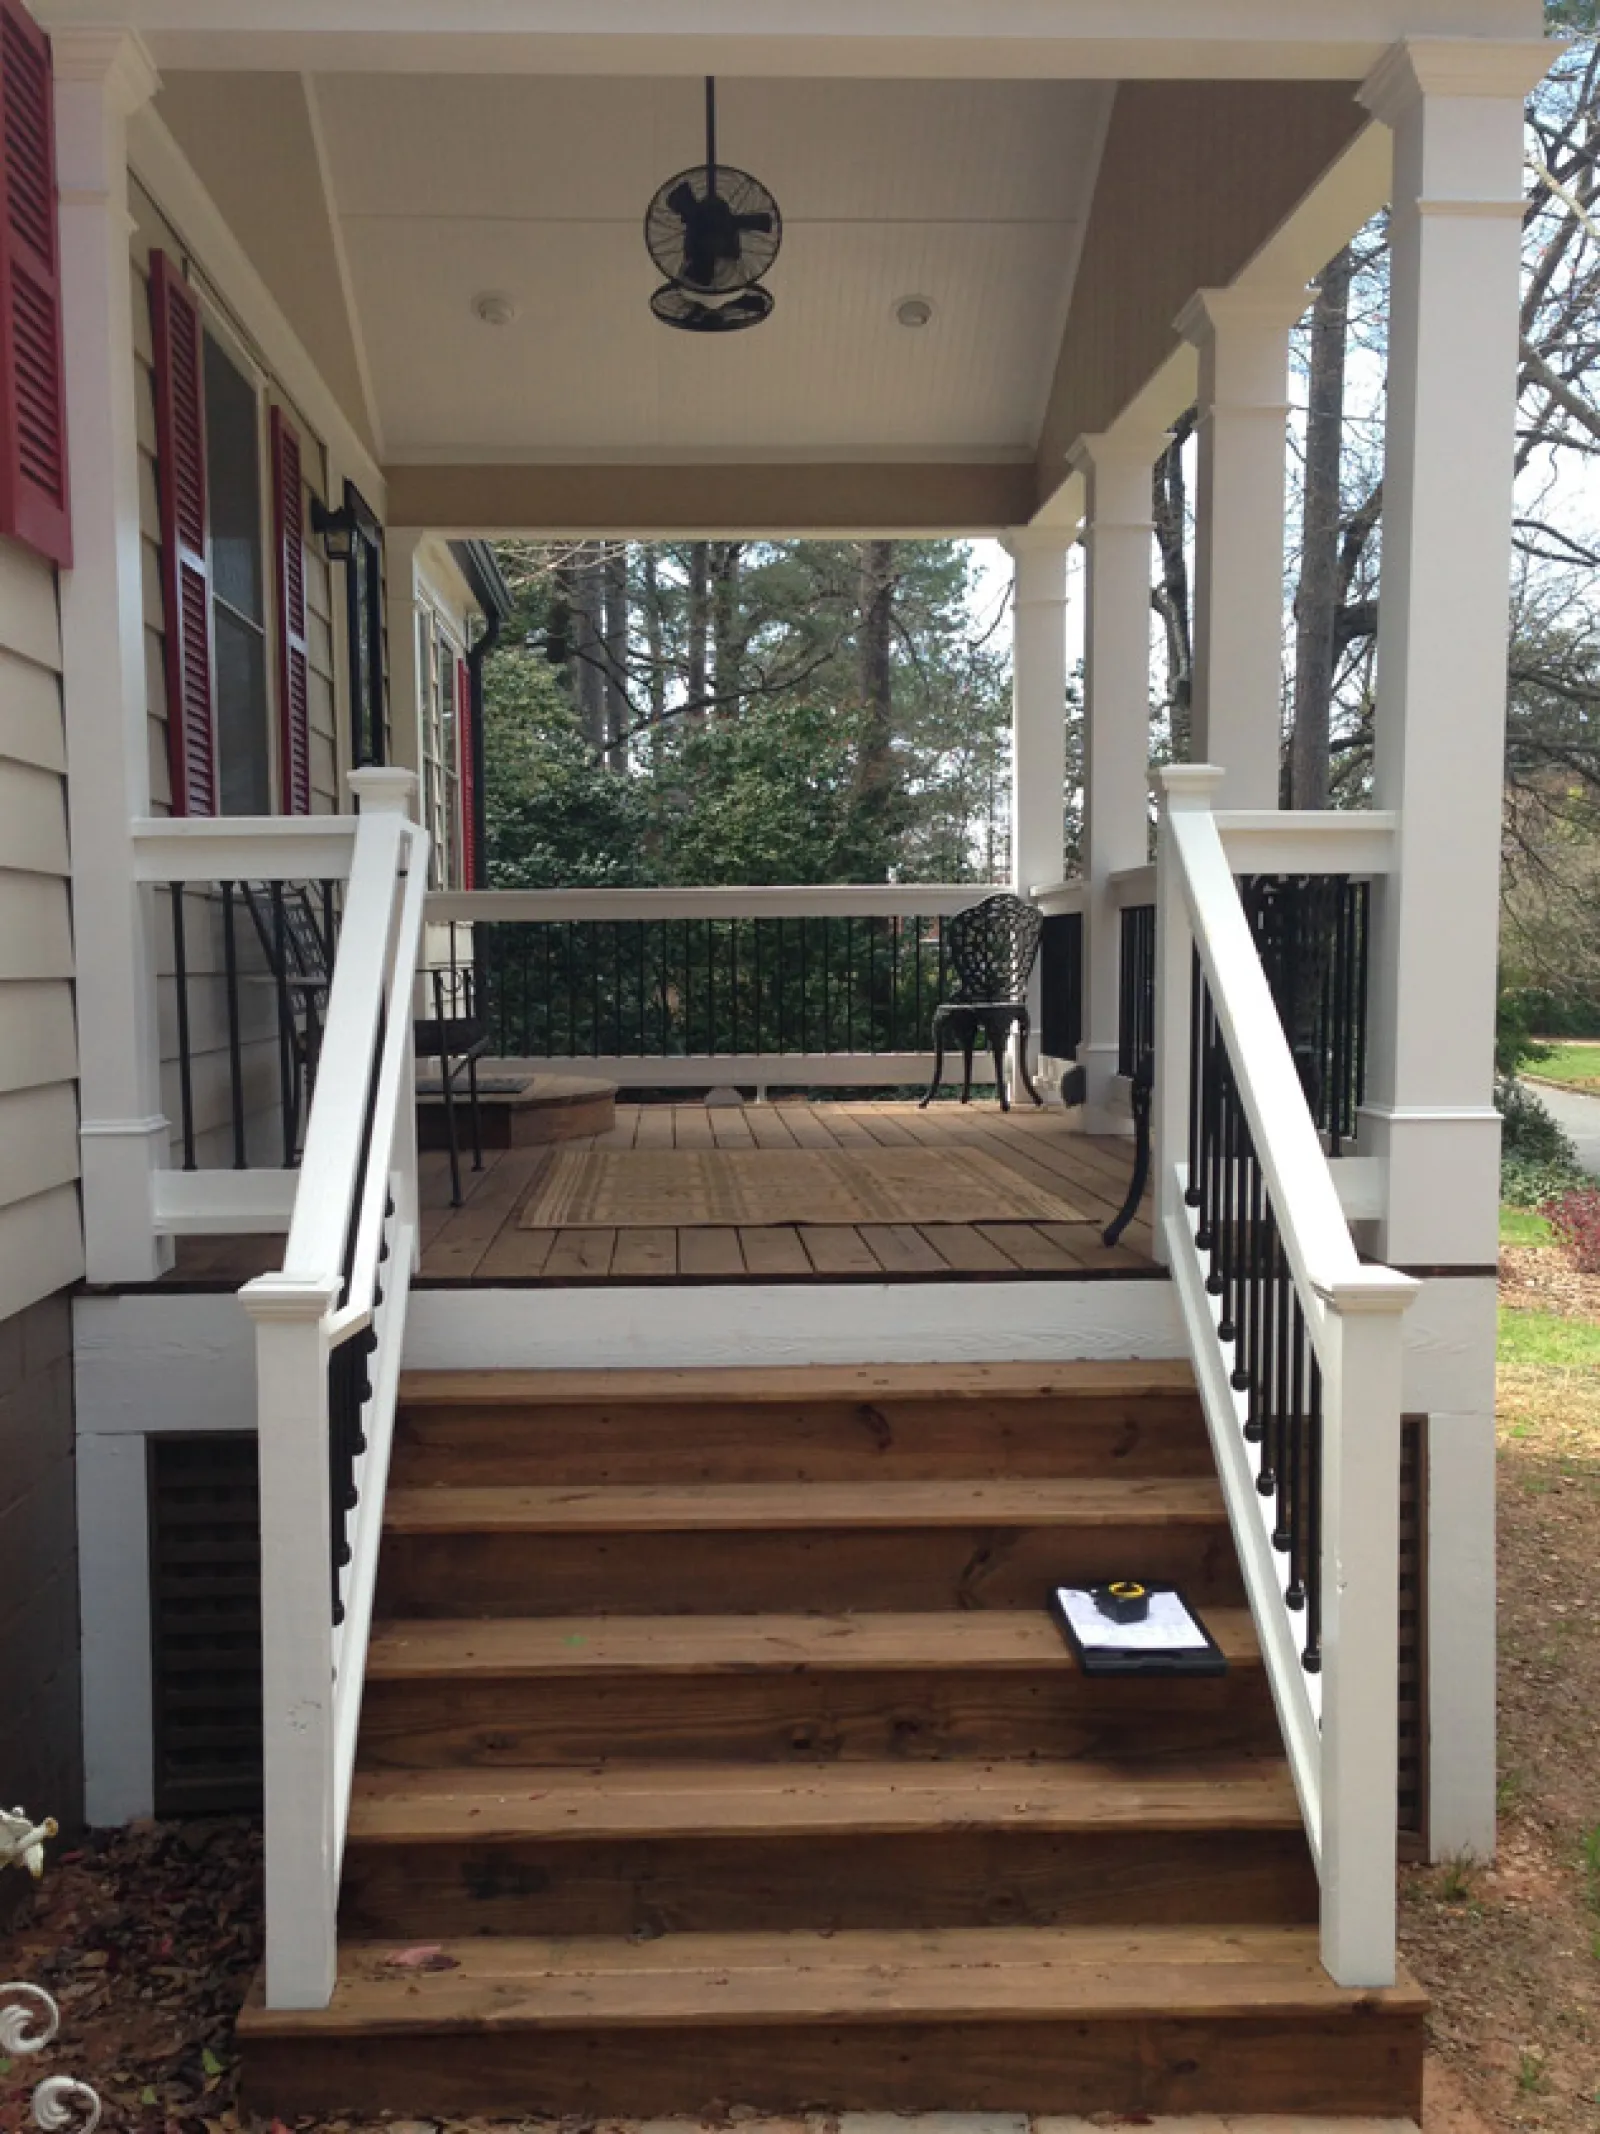 a wooden porch with a railing